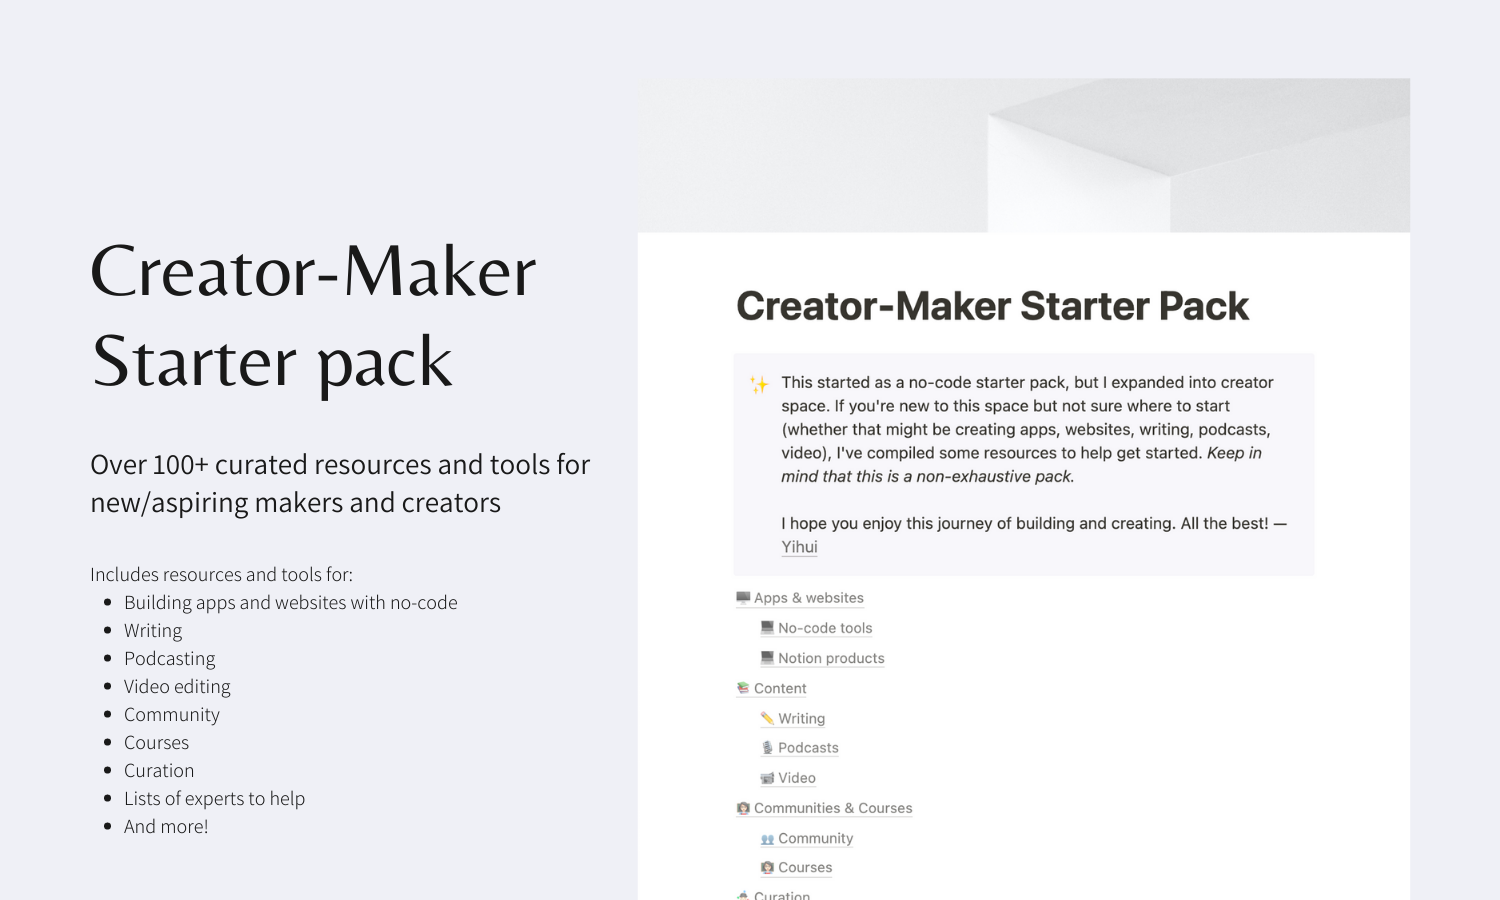 Beginner's guide to making and creating in the creator economy